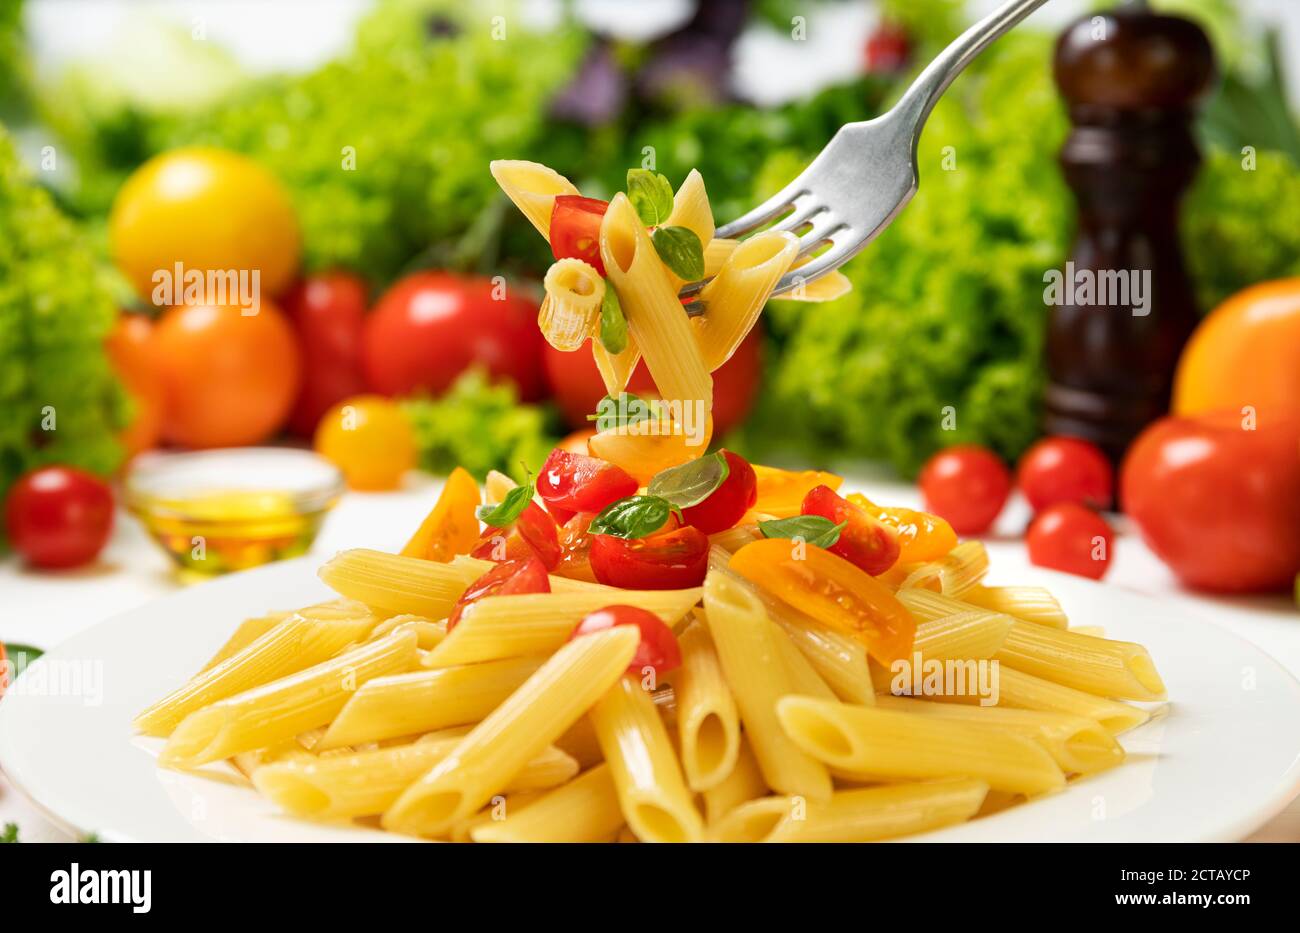 Plate of italian pasta, penne rigate on fork with tomatoes and basil Stock Photo